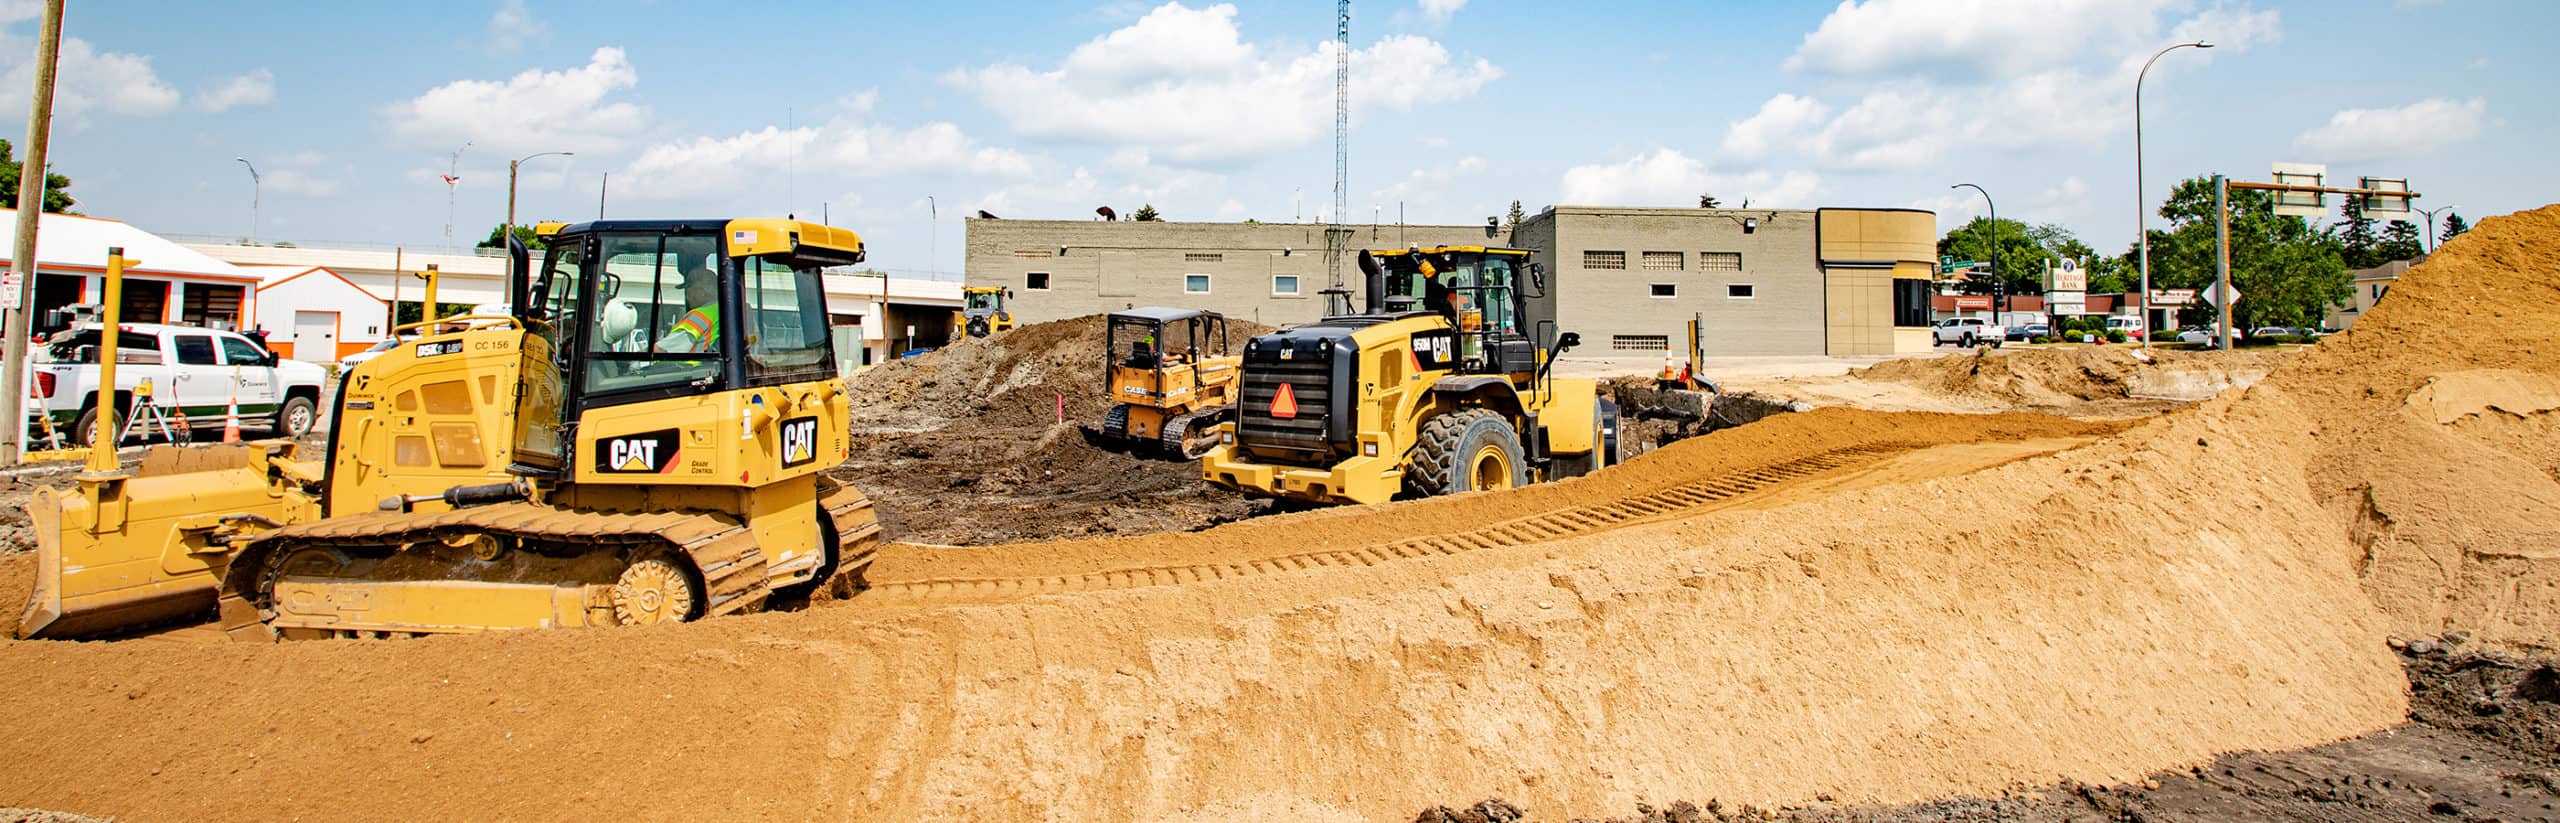 CAT Dozer moving dirt overtop a dirt pile at a commercial construction site.